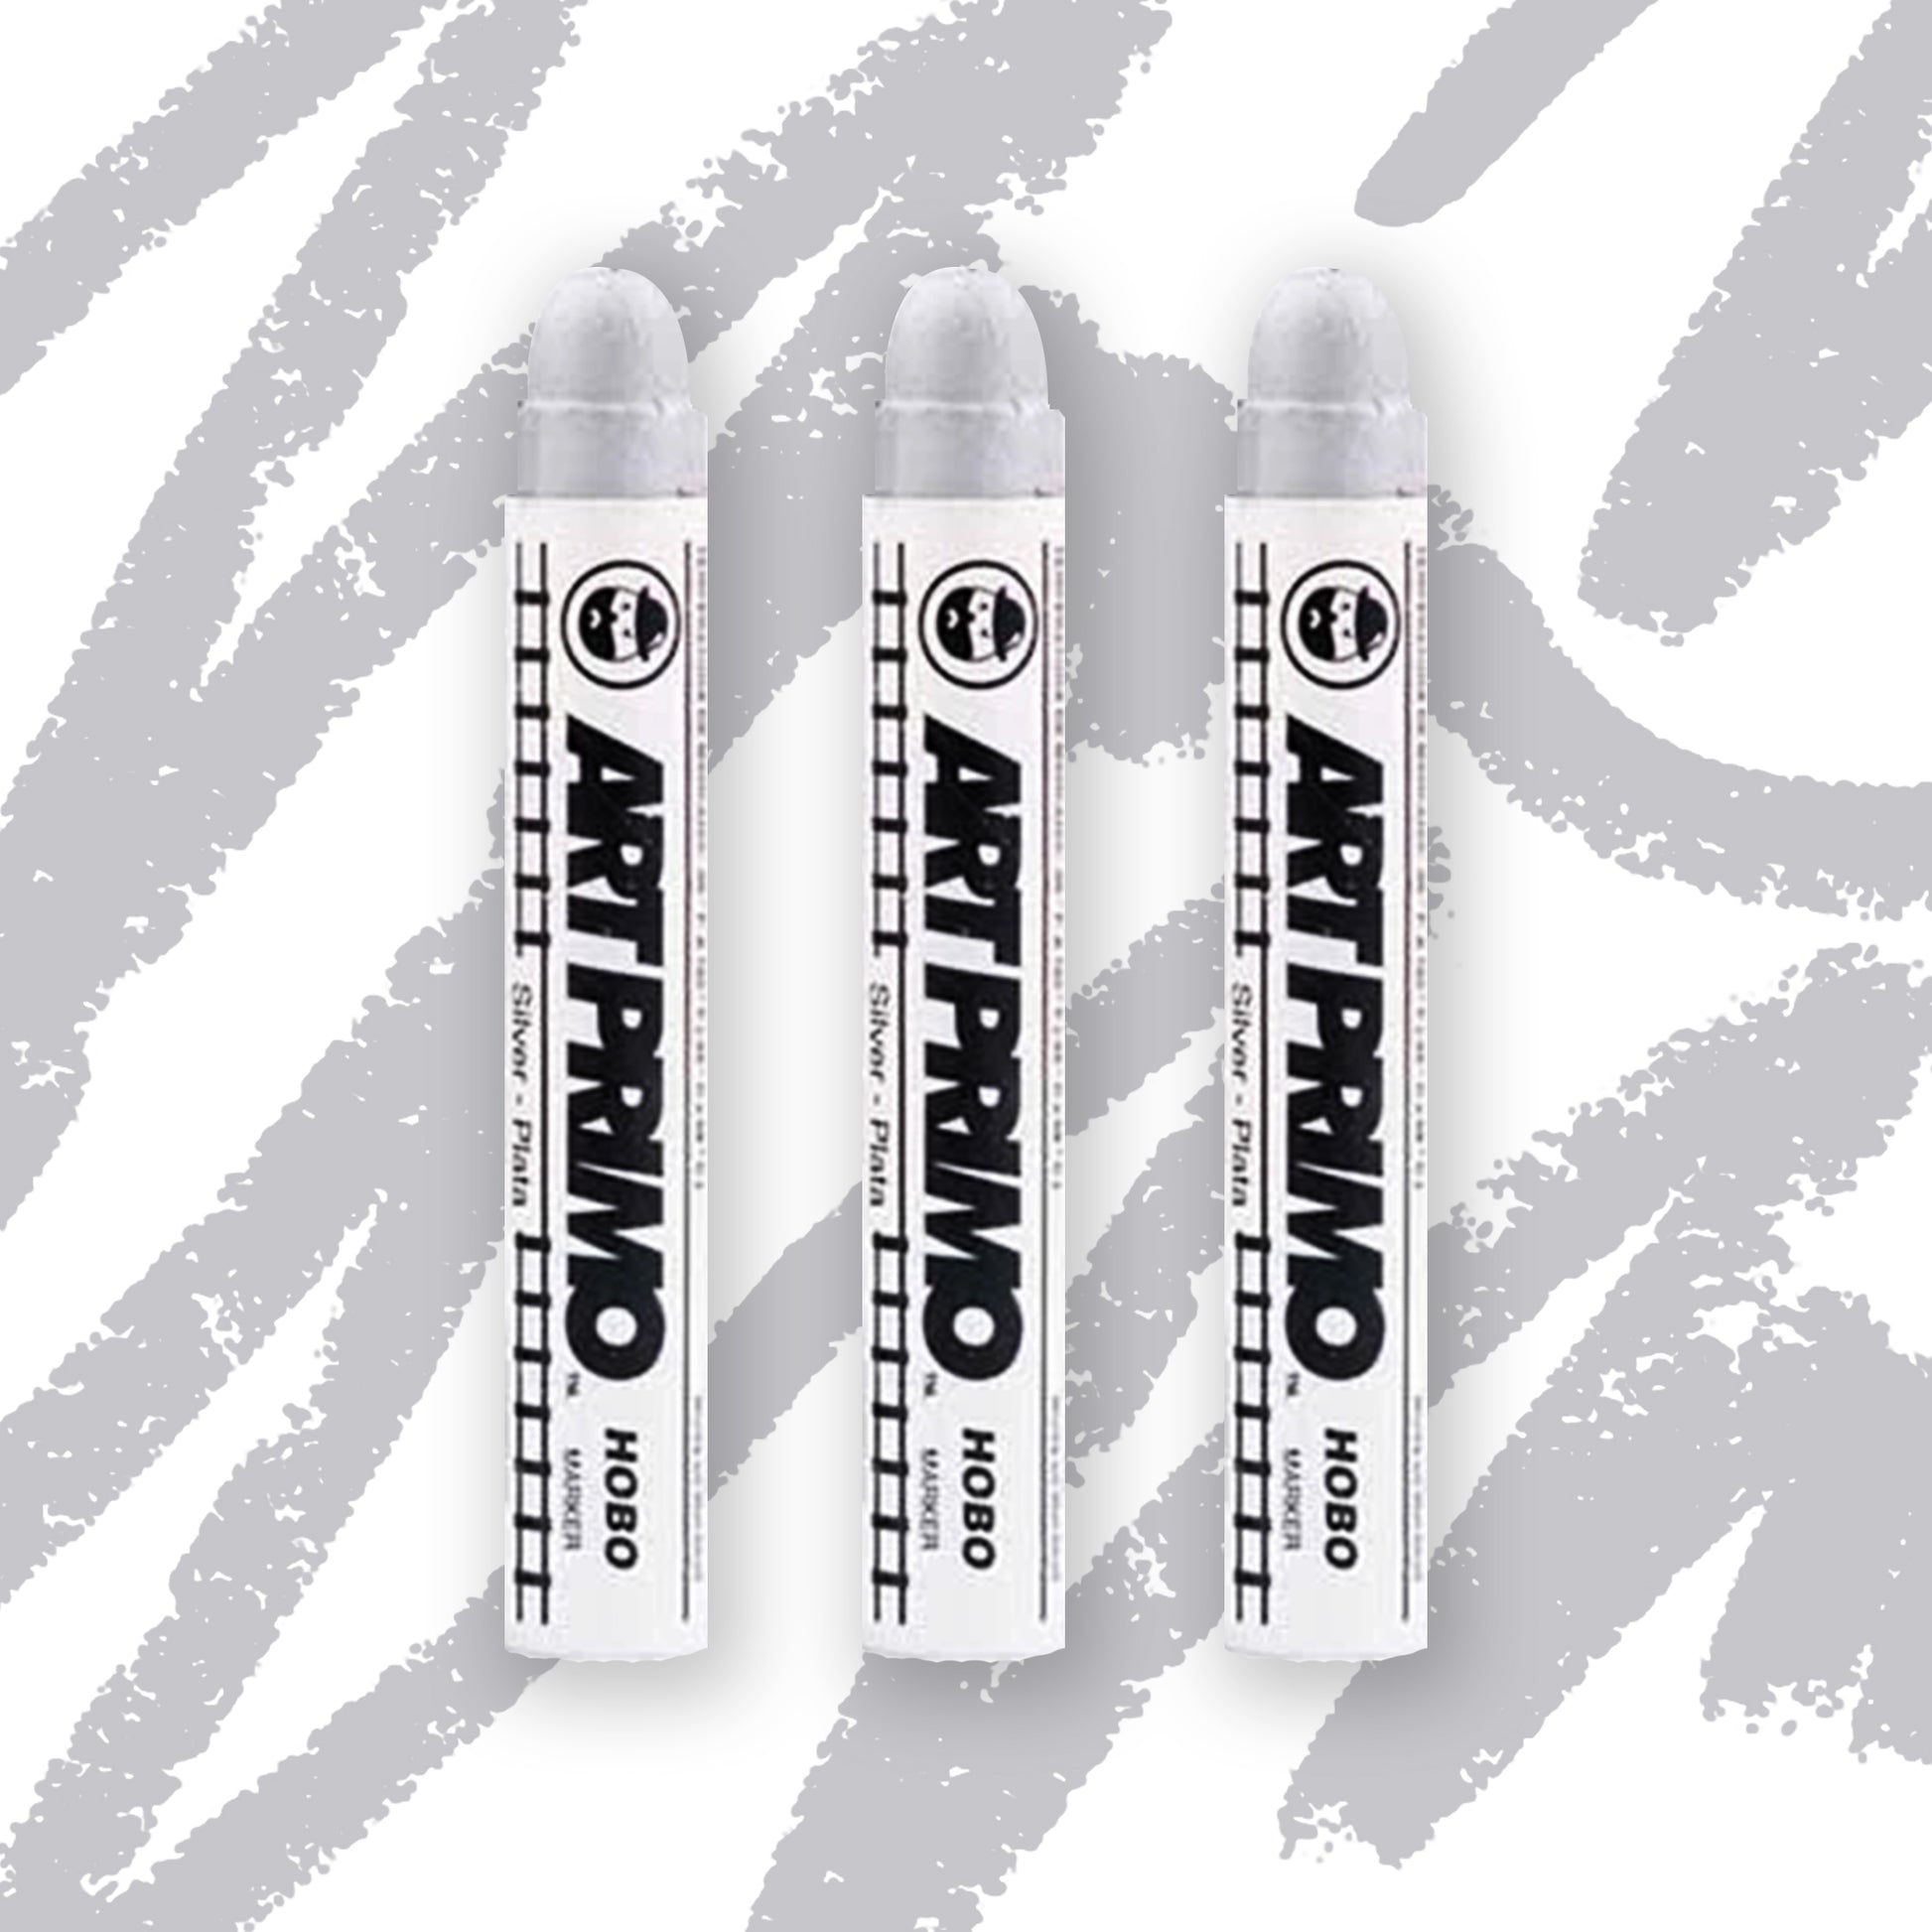 Three silver crayon type markers with a white label reading "Art Primo"